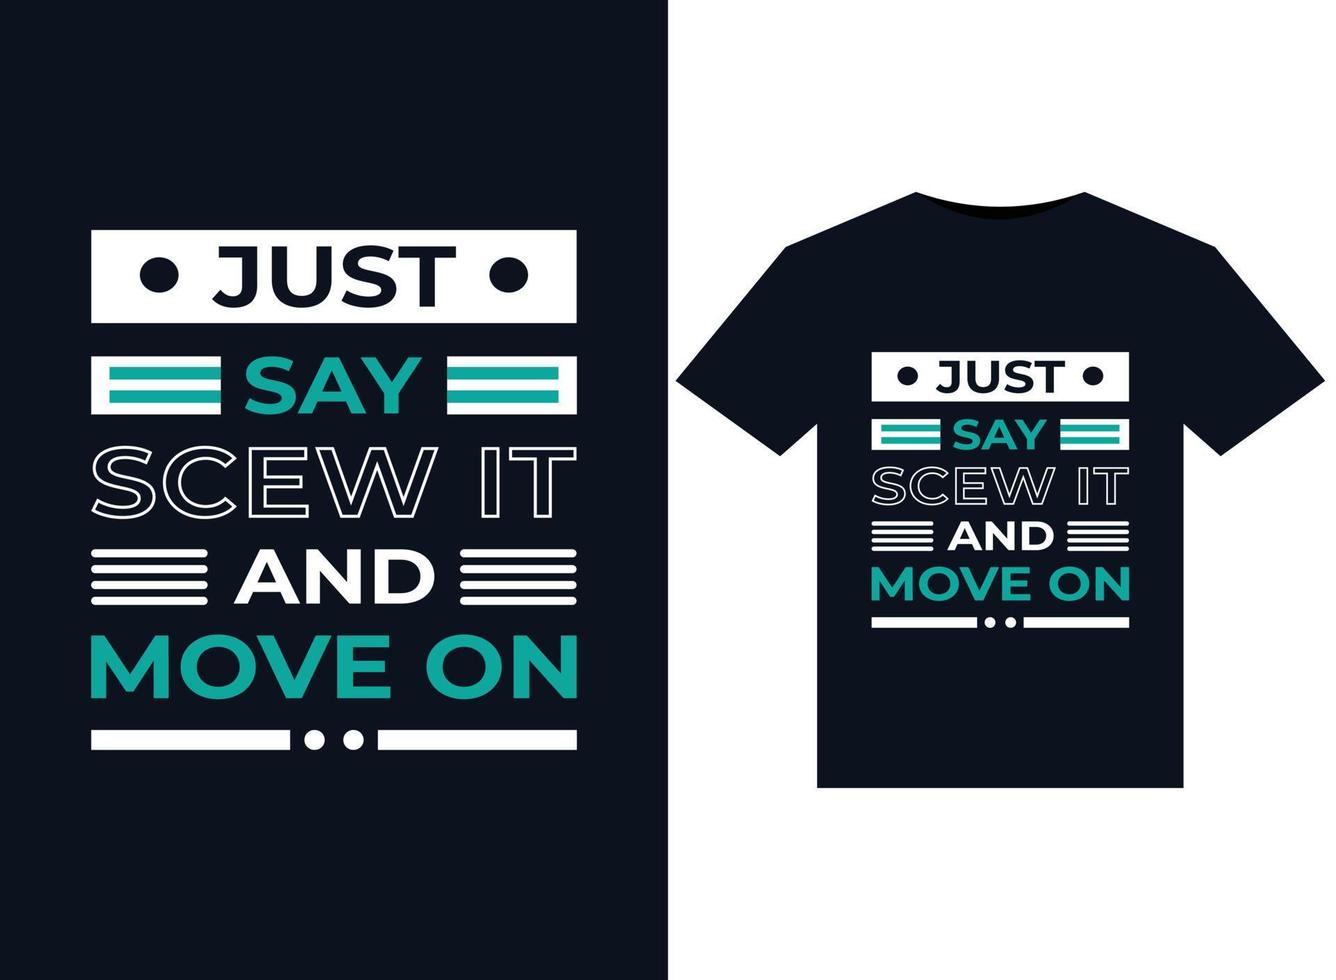 Just say screw it and move on illustrations for print-ready T-Shirts design vector